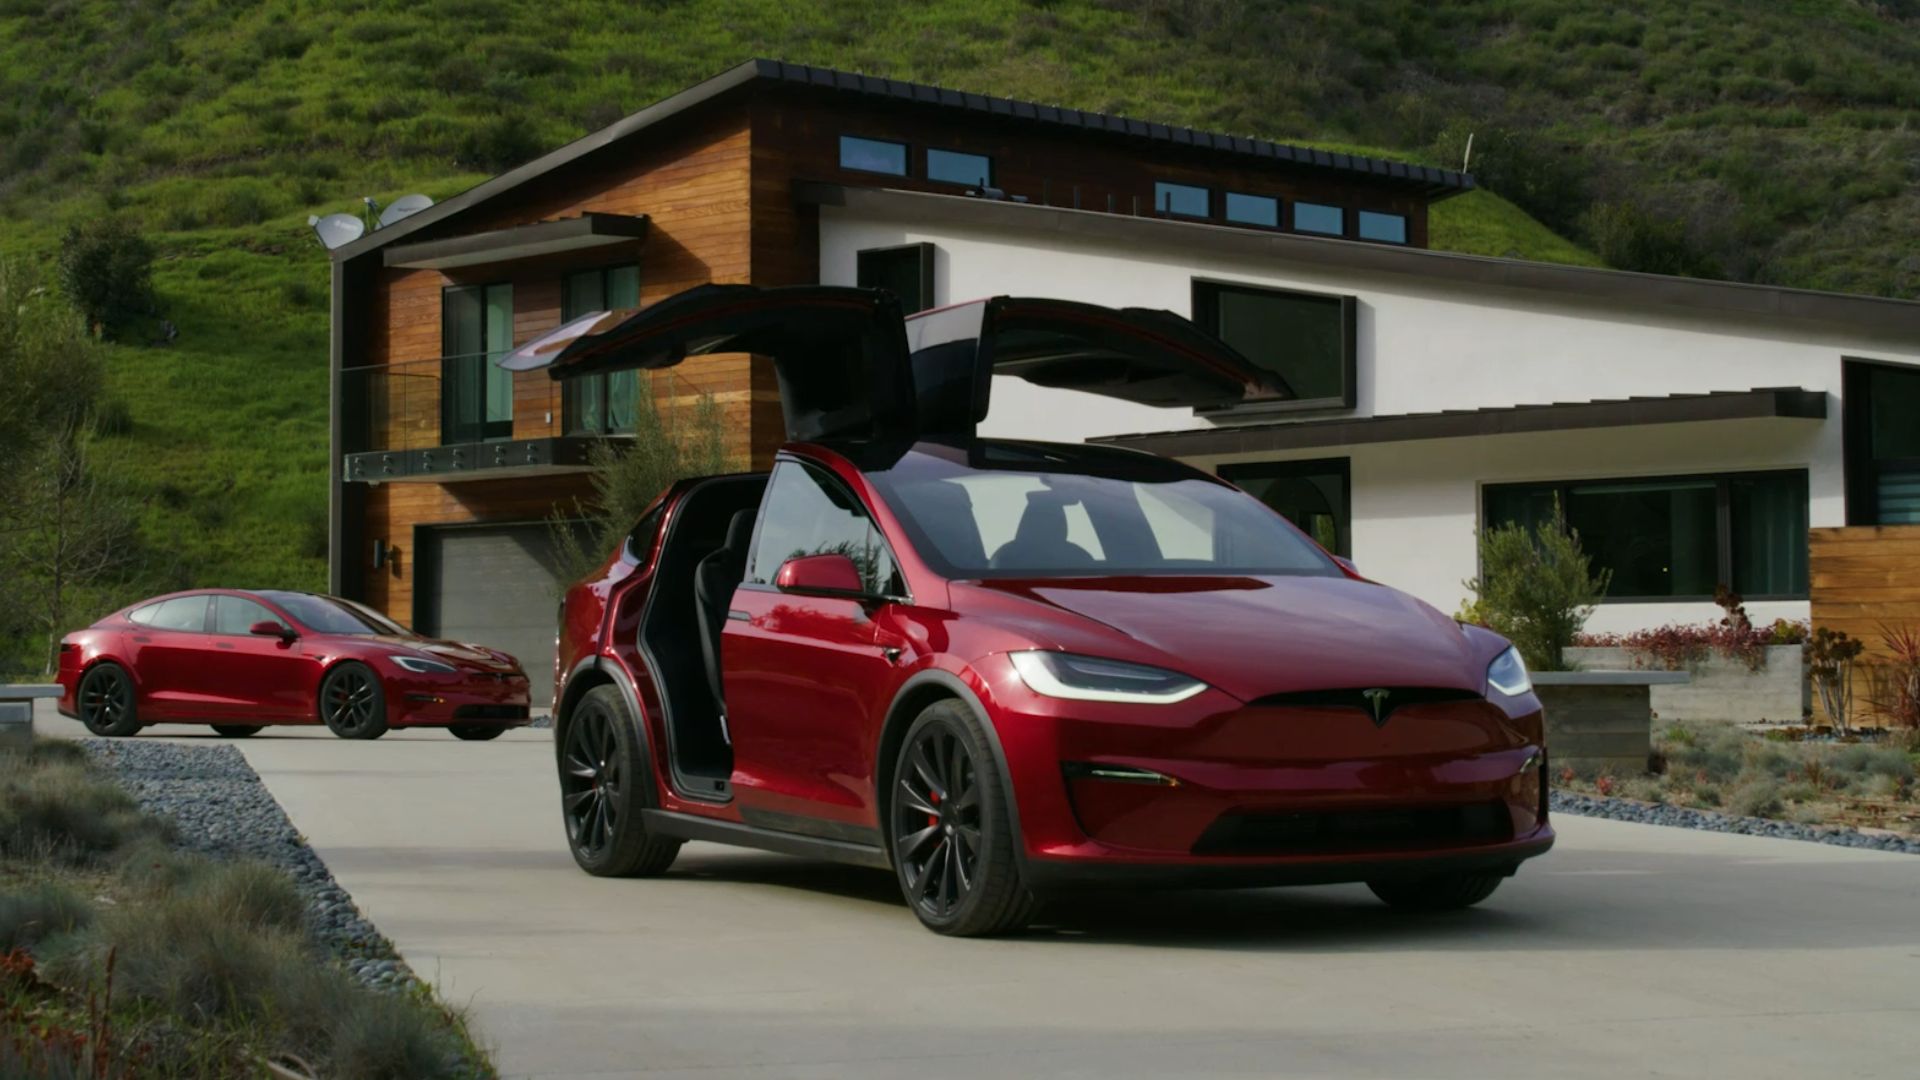 Tesla on jury trial after toddler crashes Model X into pregnant mother [Video]